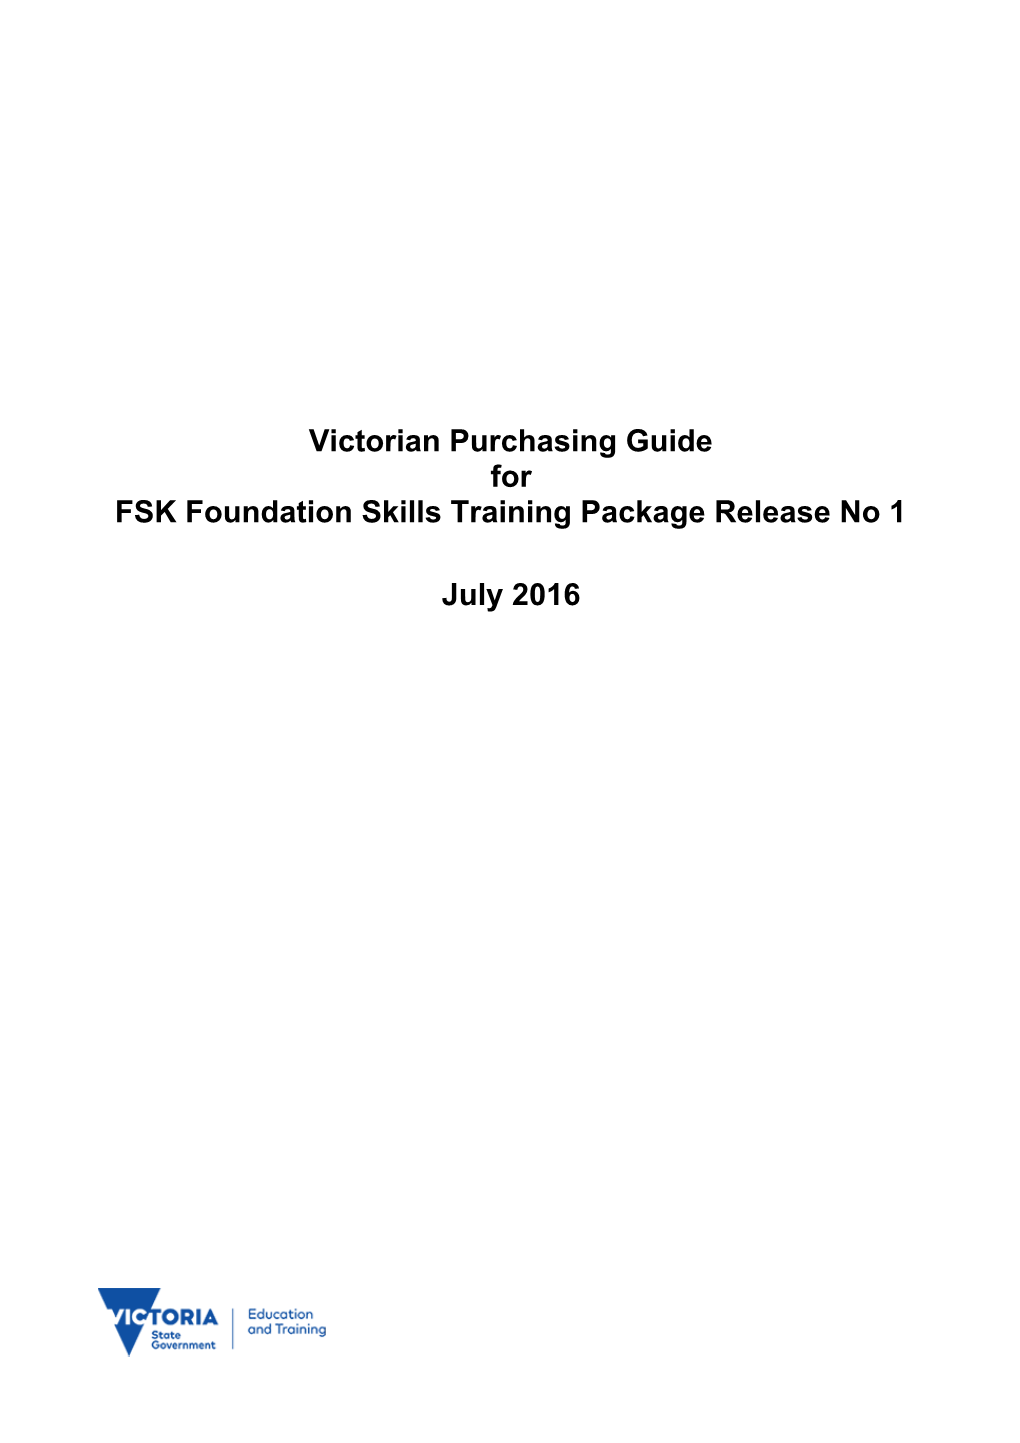 Victorian Purchasing Guide for FSK Foundation Skills Version 1